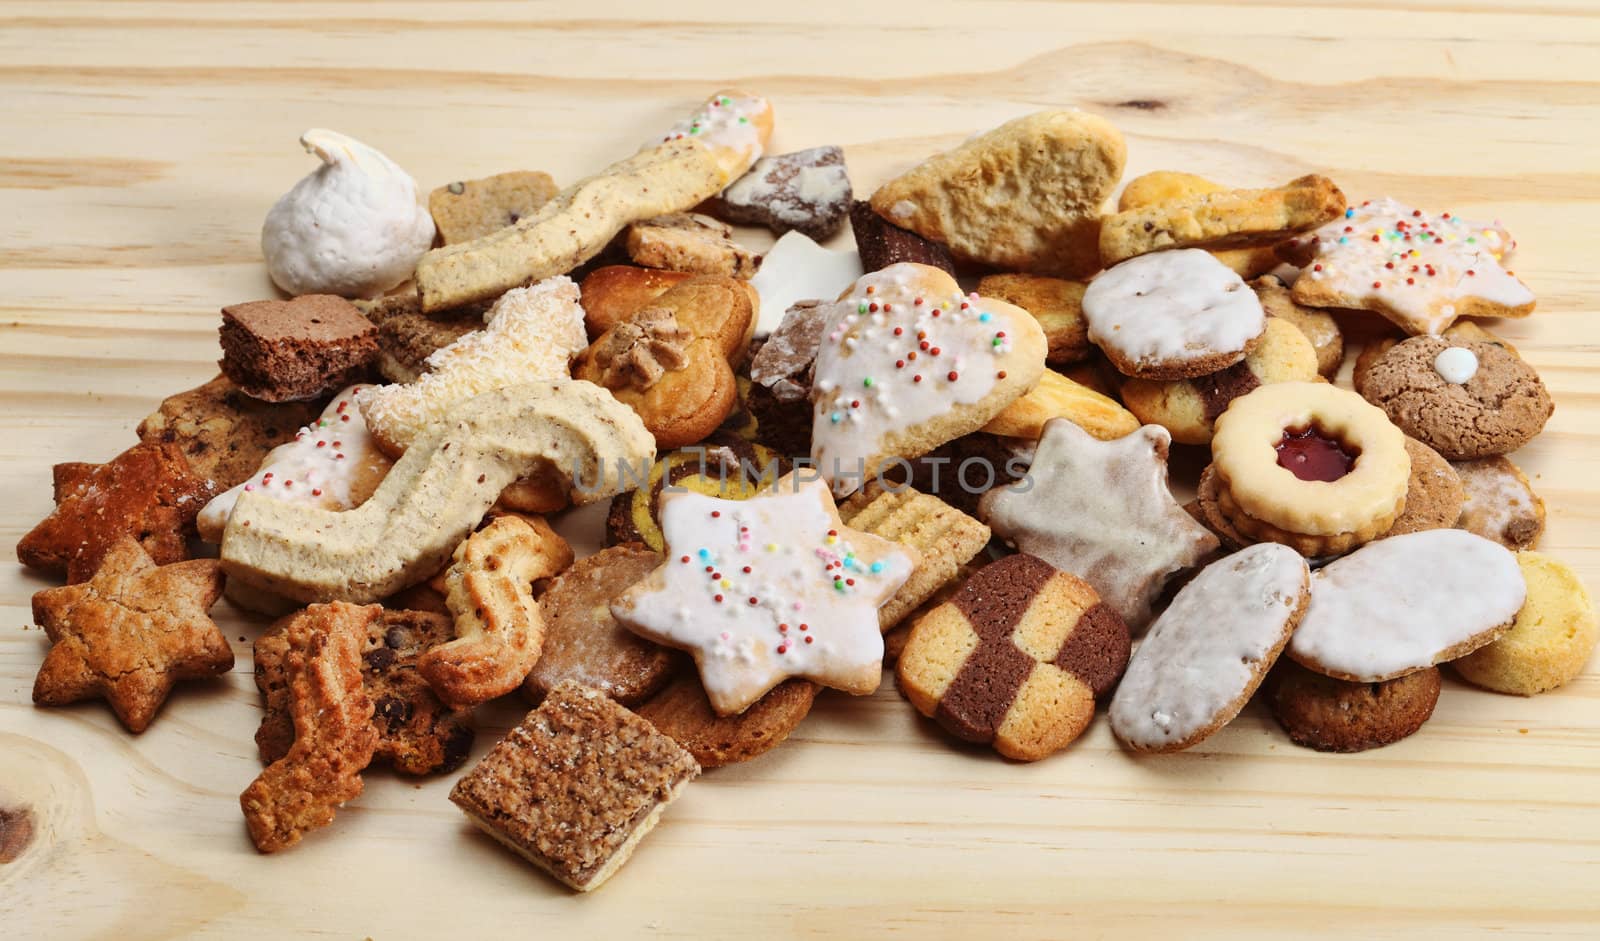 Stack of various brown biscuits and cookies on a wooden table.